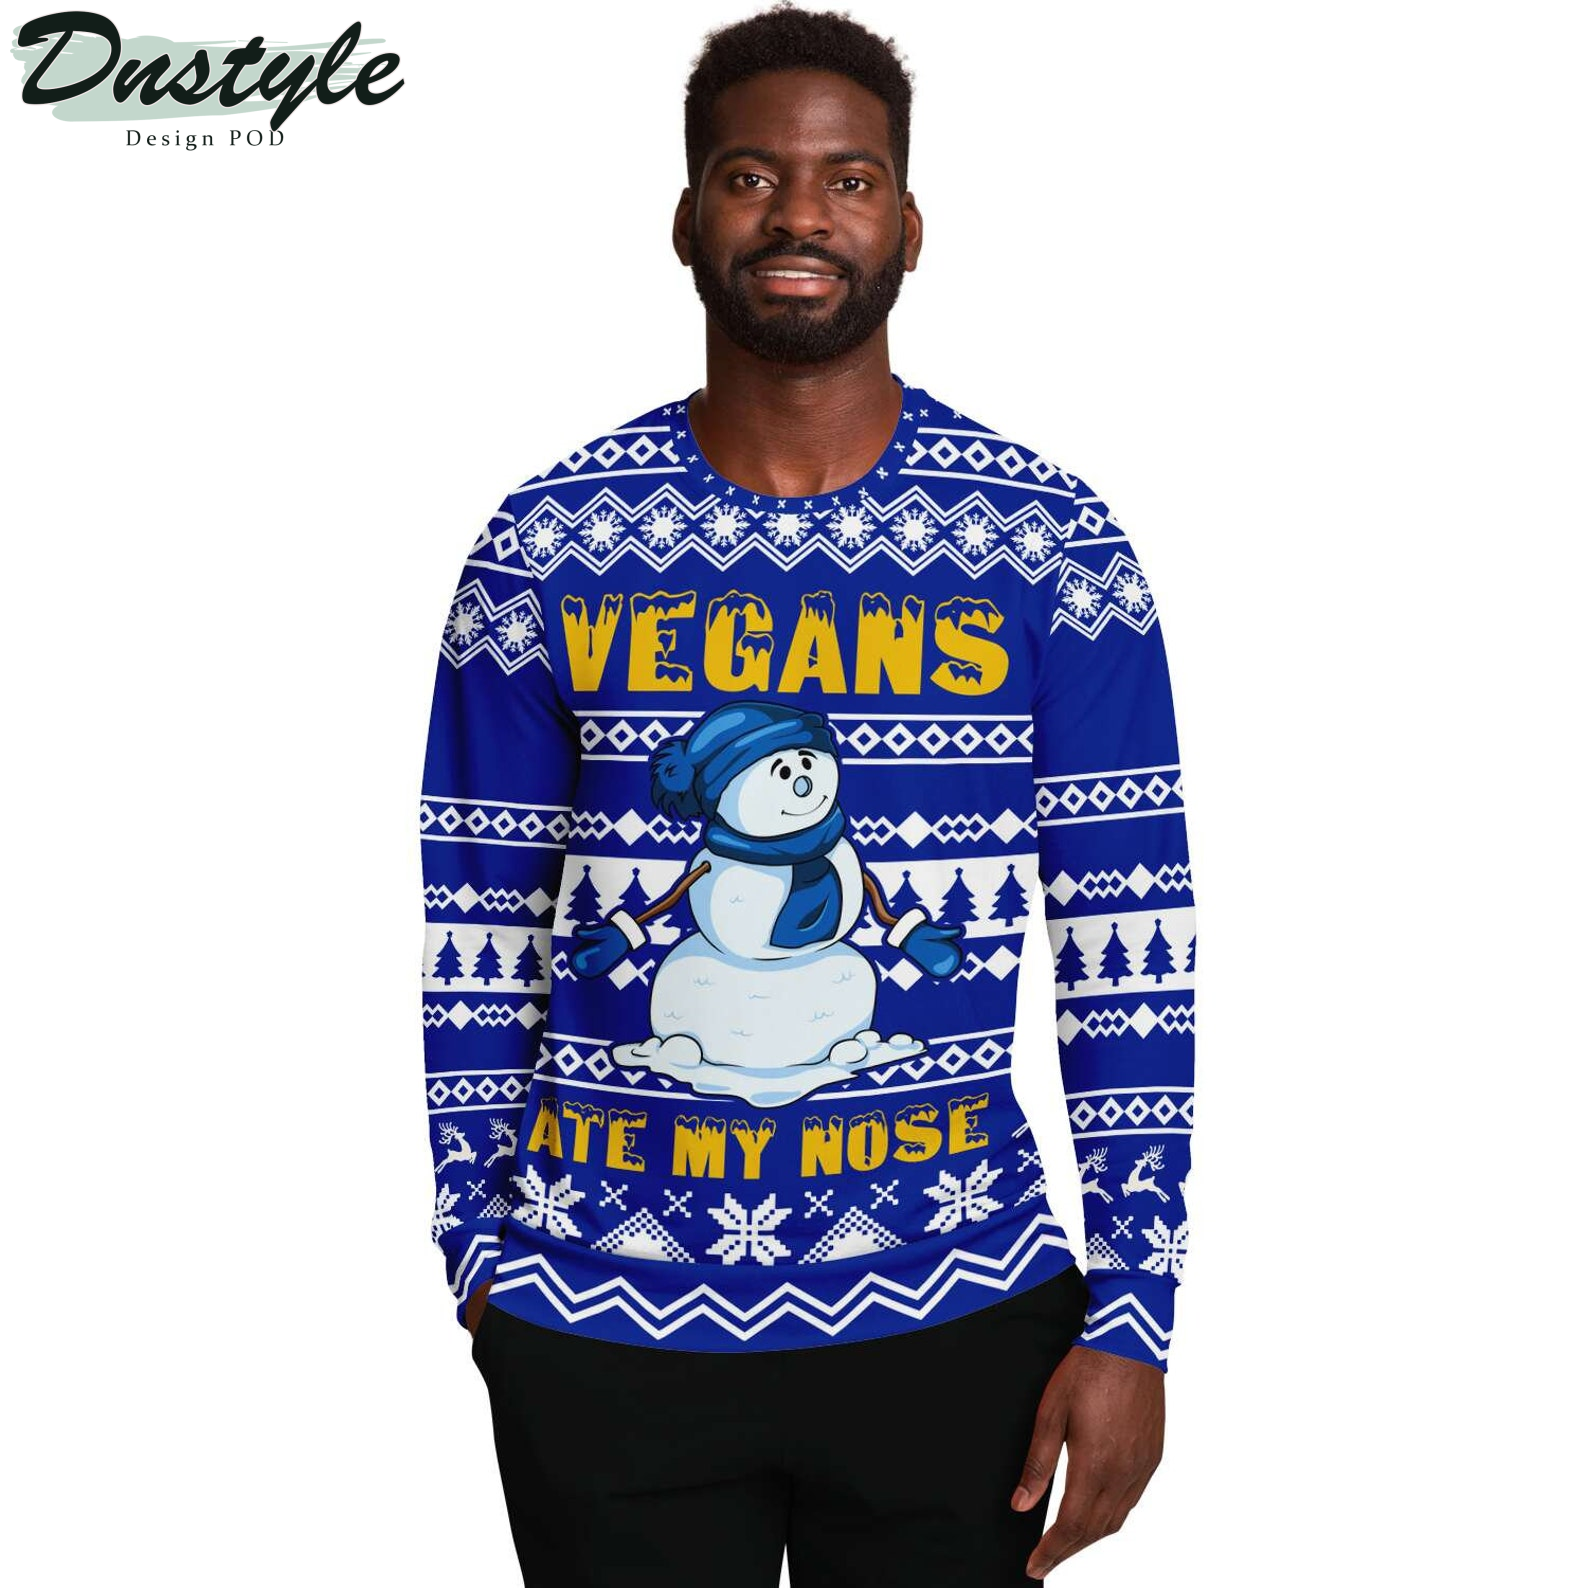 Vegans Ate My Nose 2022 Ugly Christmas Sweater